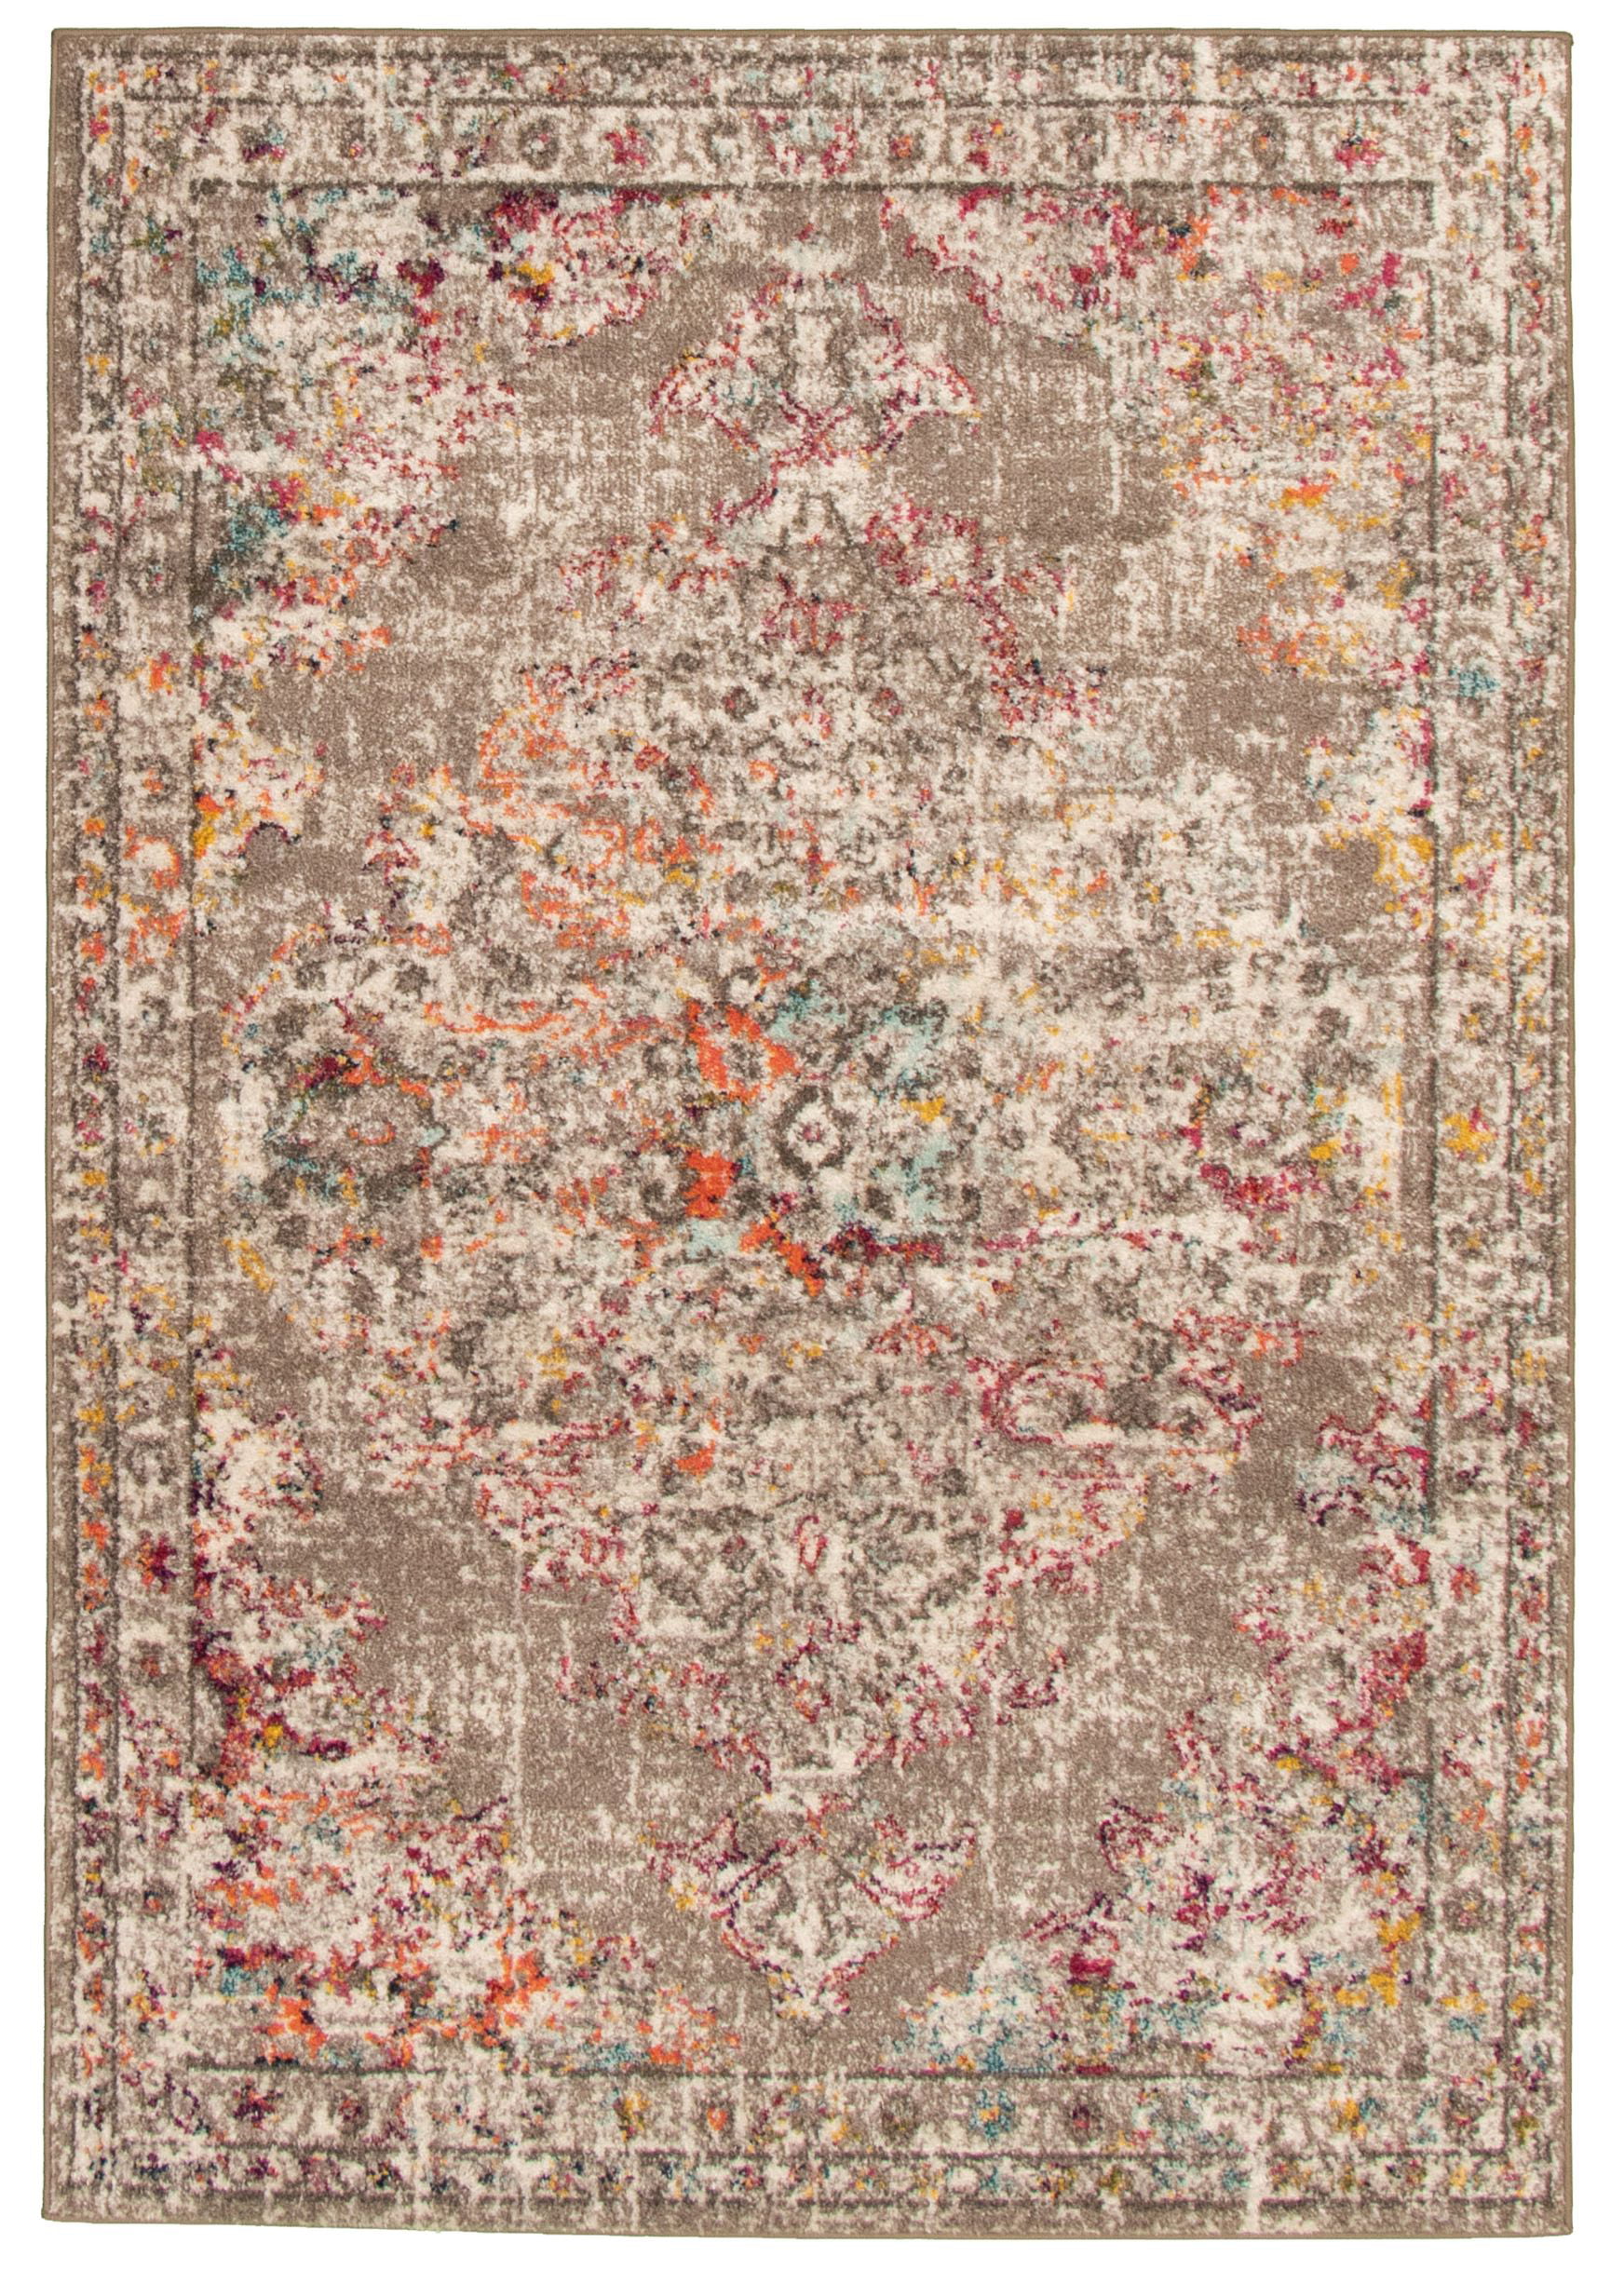 Chobi Finest Bordered Brown Rug 3'11 x 6'0 Bedroom 346698 Hand-Knotted Wool Rug eCarpet Gallery Area Rug for Living Room 